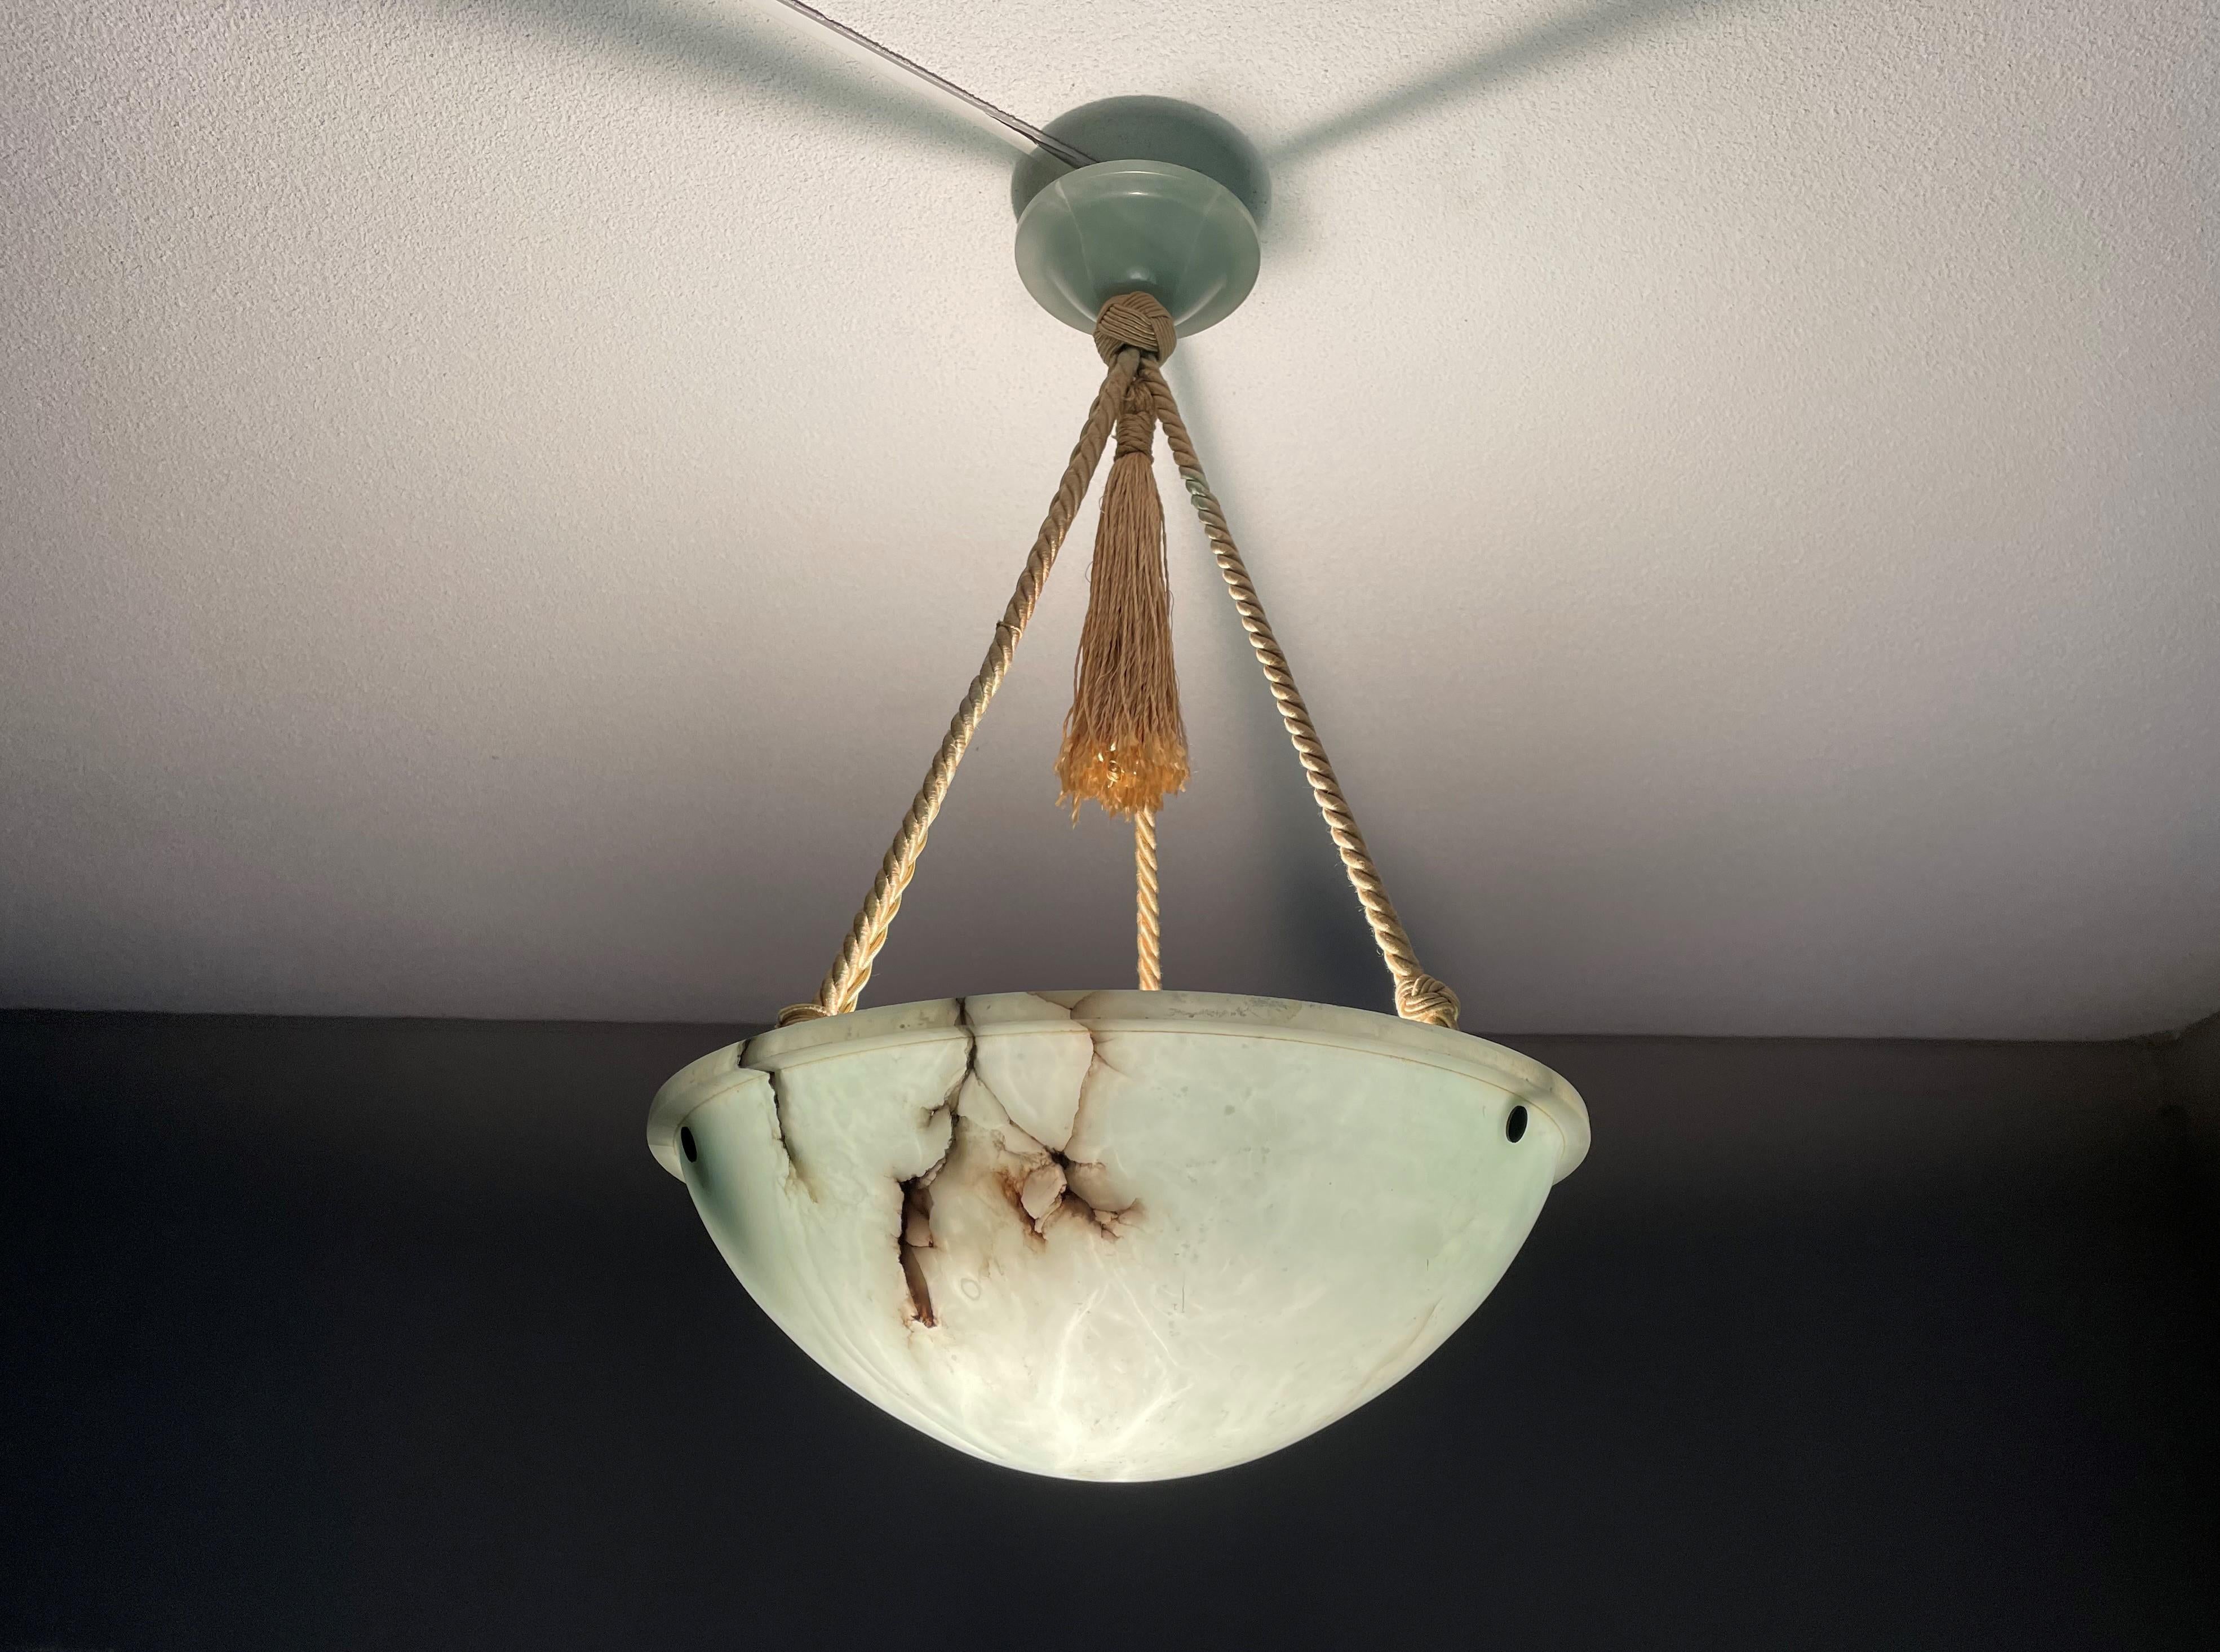 Striking Art Deco Pendant / Flushmount with Mint Green Alabaster Shade & Canopy 7